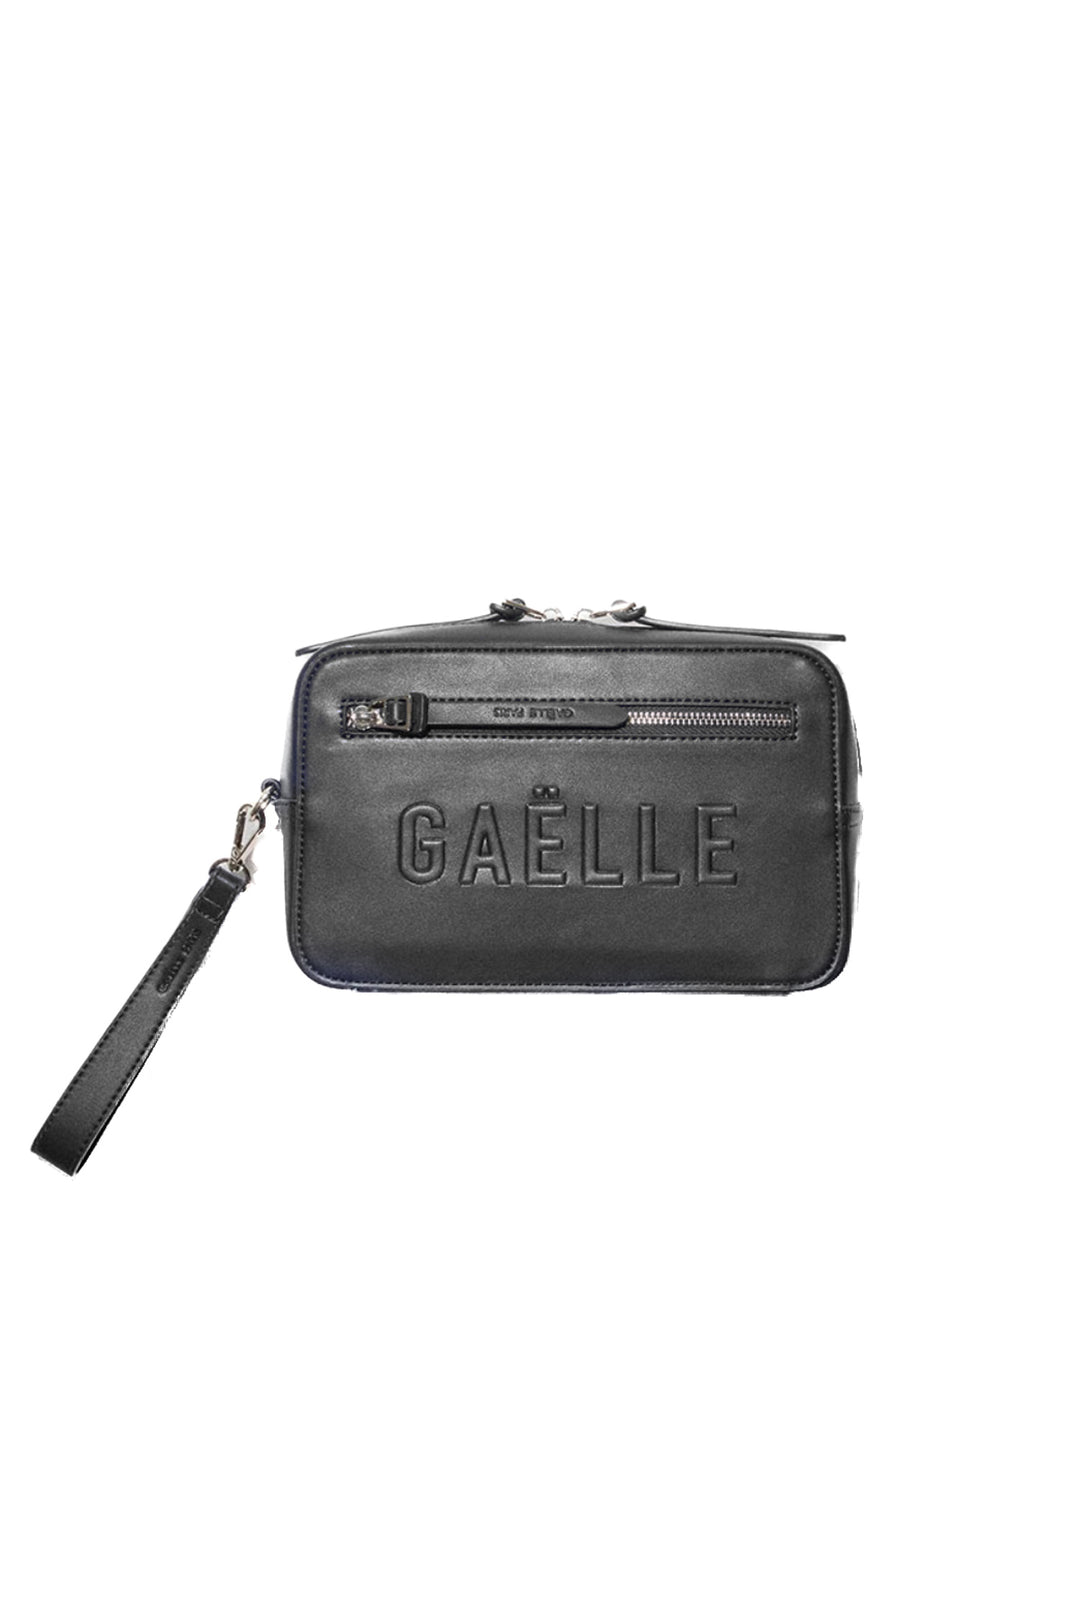 Gaelle Pochette Man in faux leather with handle and logo